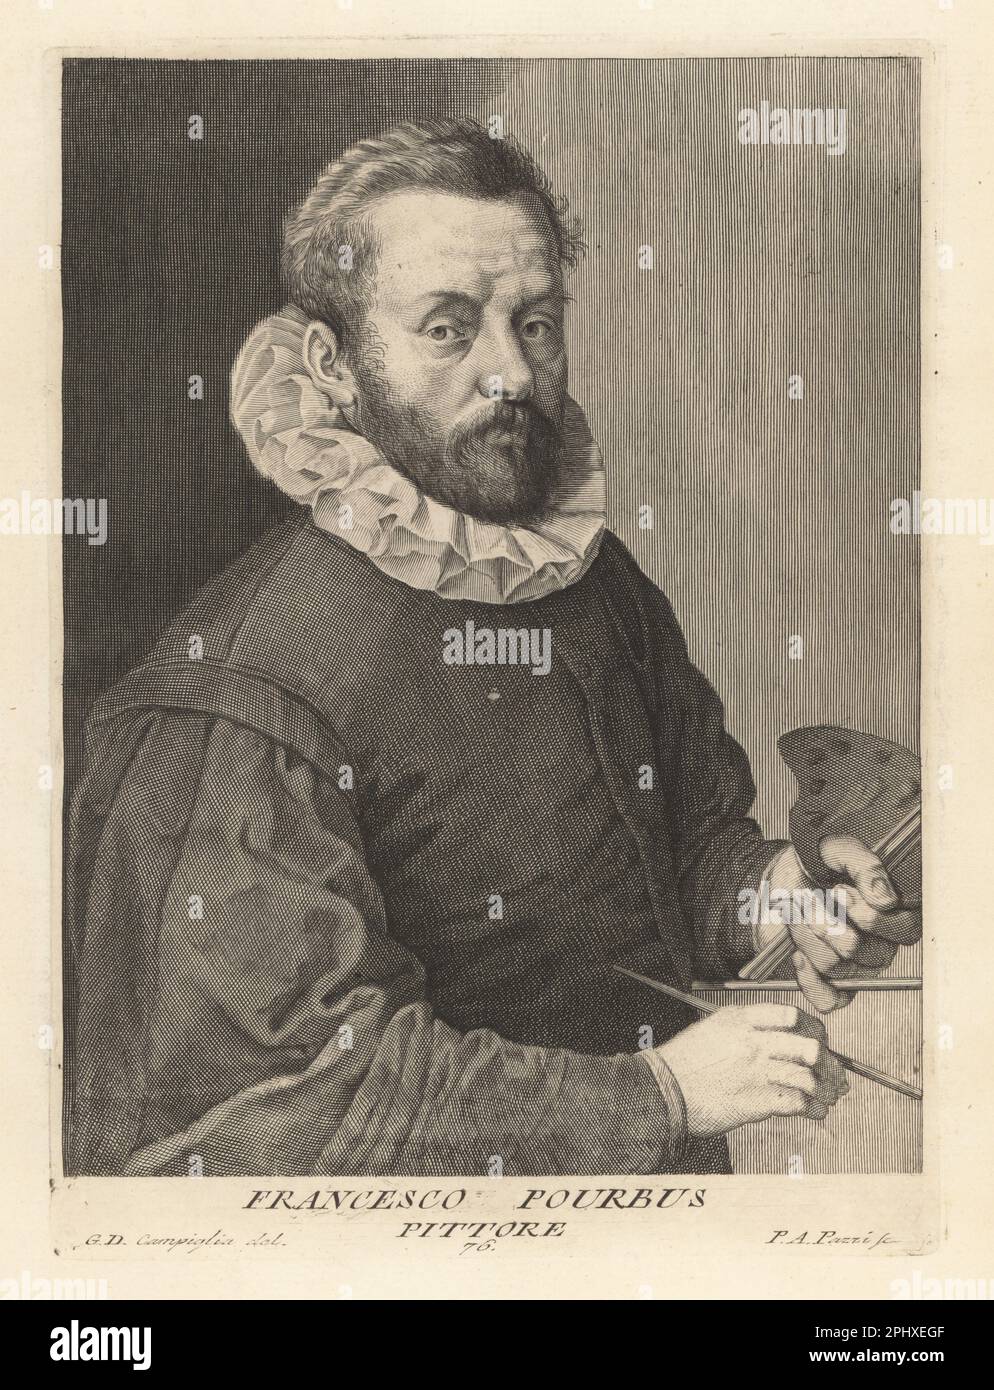 Frans Pourbus the Younger, Flemish portrait painter, son of Frans Pourbus the Elder, 1569–1622. Painter to Marie de' Medici and the Duke of Mantua. In ruff collar holding paint brushes and oil palette. Francesco Pourbus, Pittore. Copperplate engraving by Pietro Antonio Pazzi after Giovanni Domenico Campiglia after a self portrait by the artist from Francesco Moucke's Museo Florentino (Museum Florentinum), Serie di Ritratti de Pittori (Series of Portraits of Painters) stamperia Mouckiana, Florence, 1752-62. Stock Photo